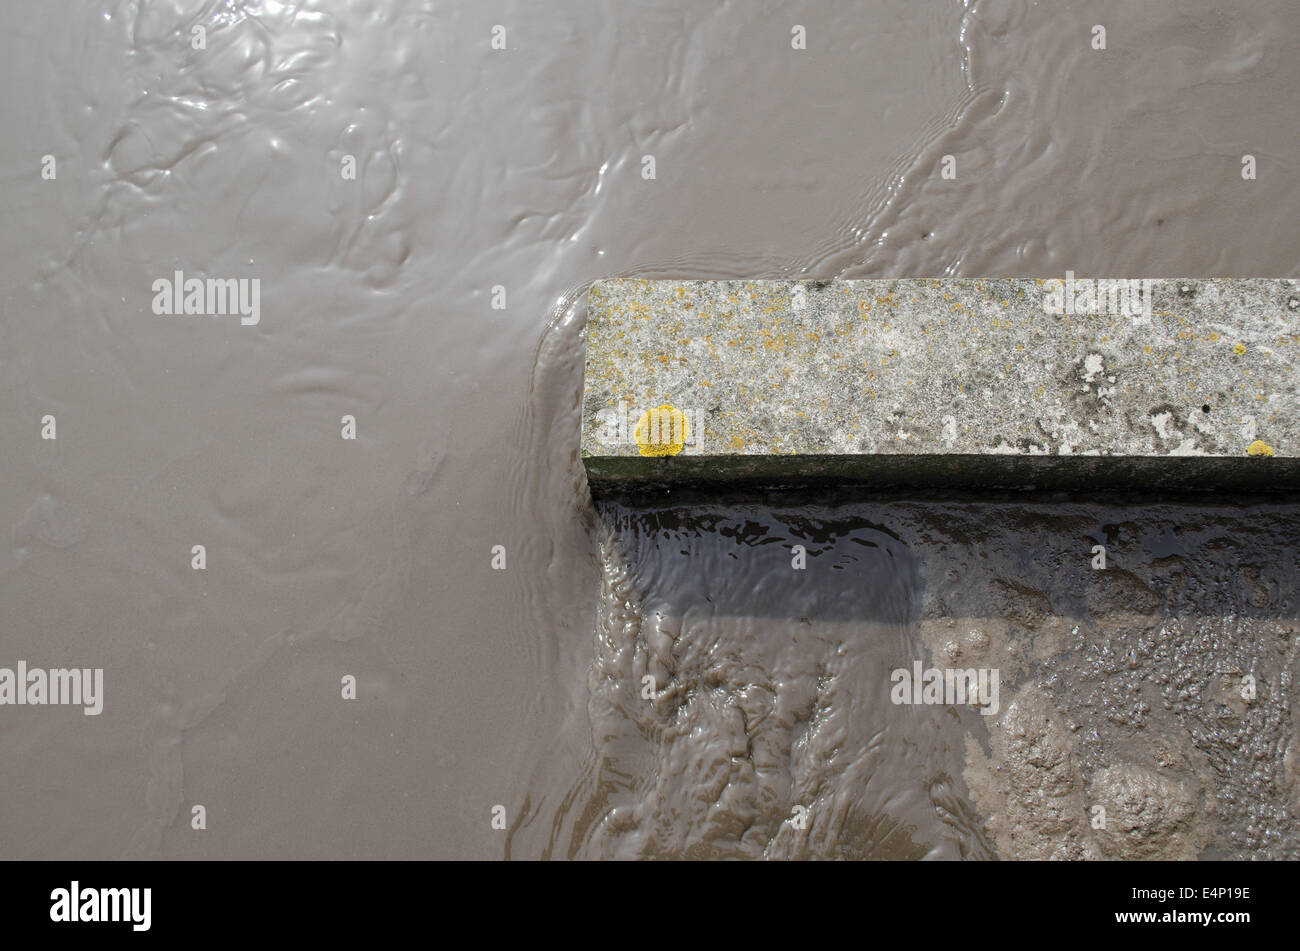 Dirty sewage water flow in aerated grit chamber treatment plant stage. Stock Photo